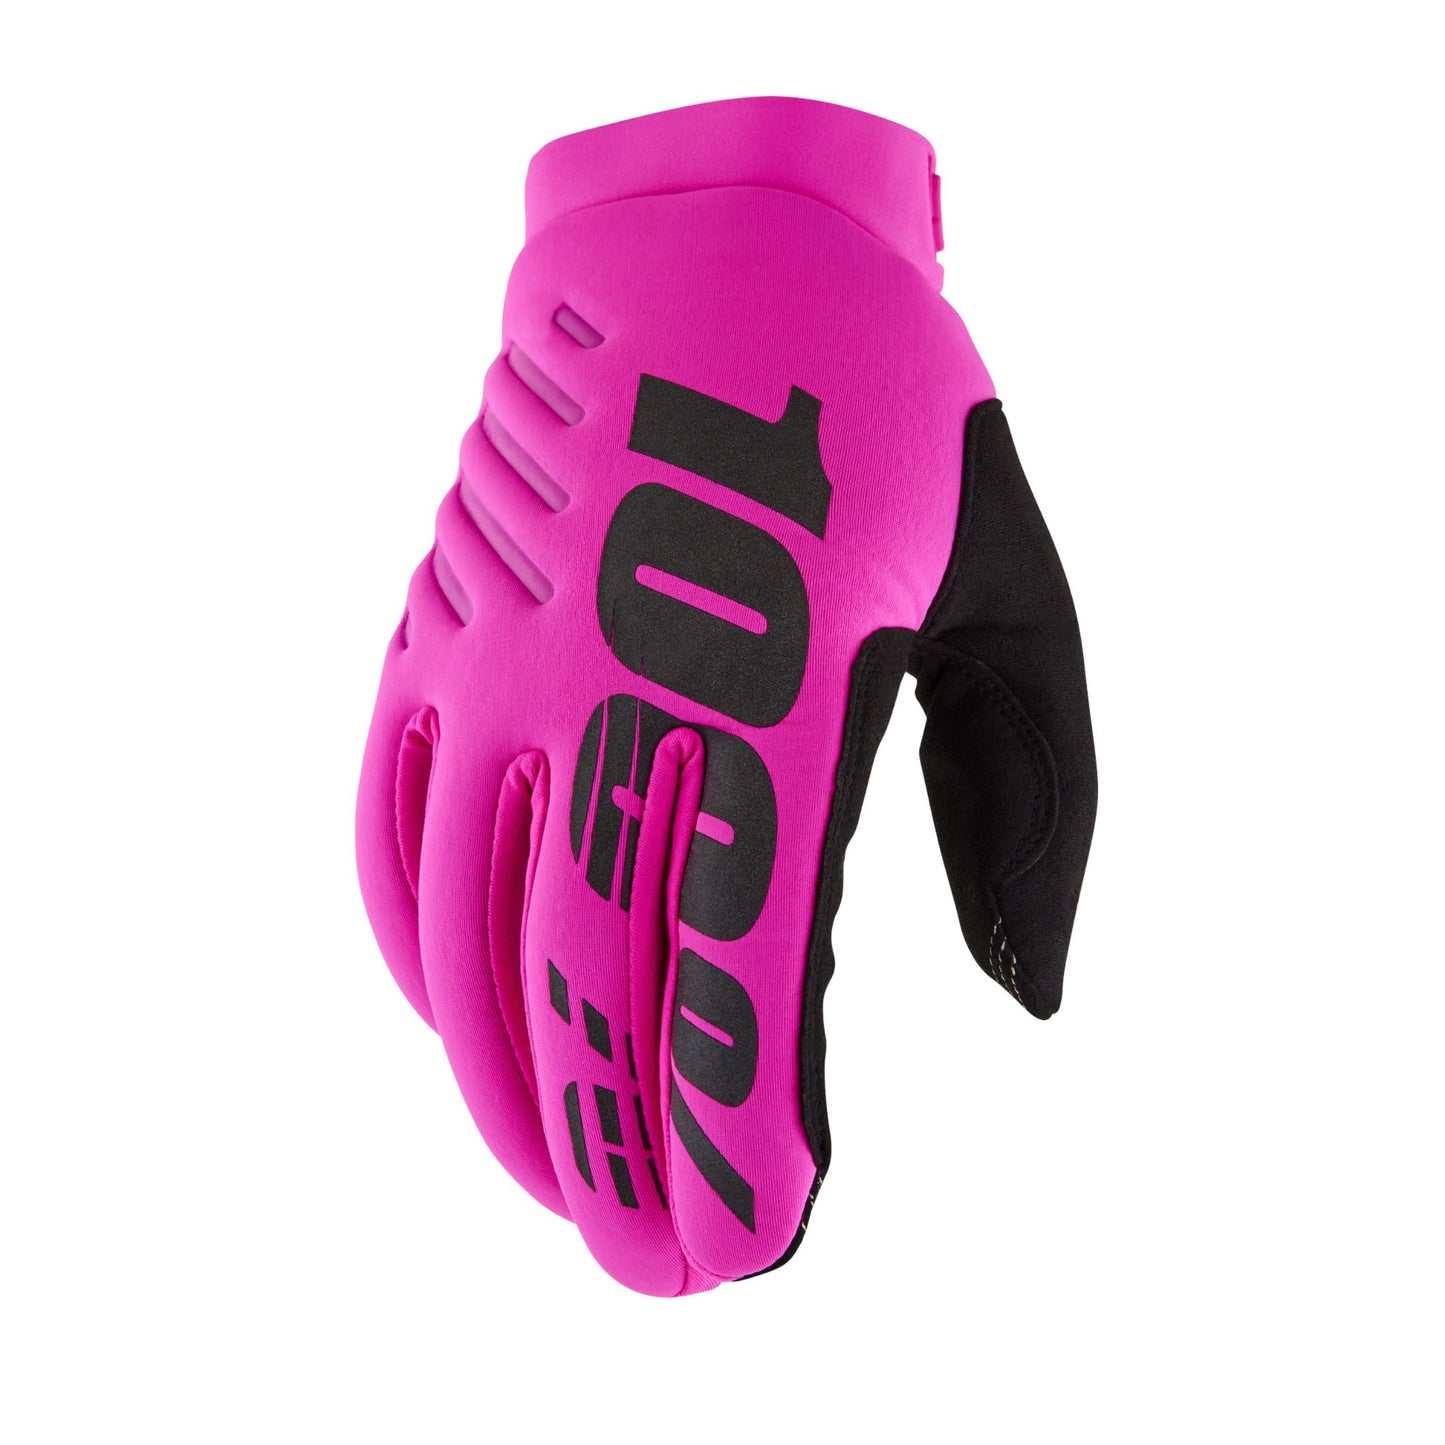 Men's Full Finger Cycling Gloves 100% Brisker AW22 Cold Weather Neon Pink X Large